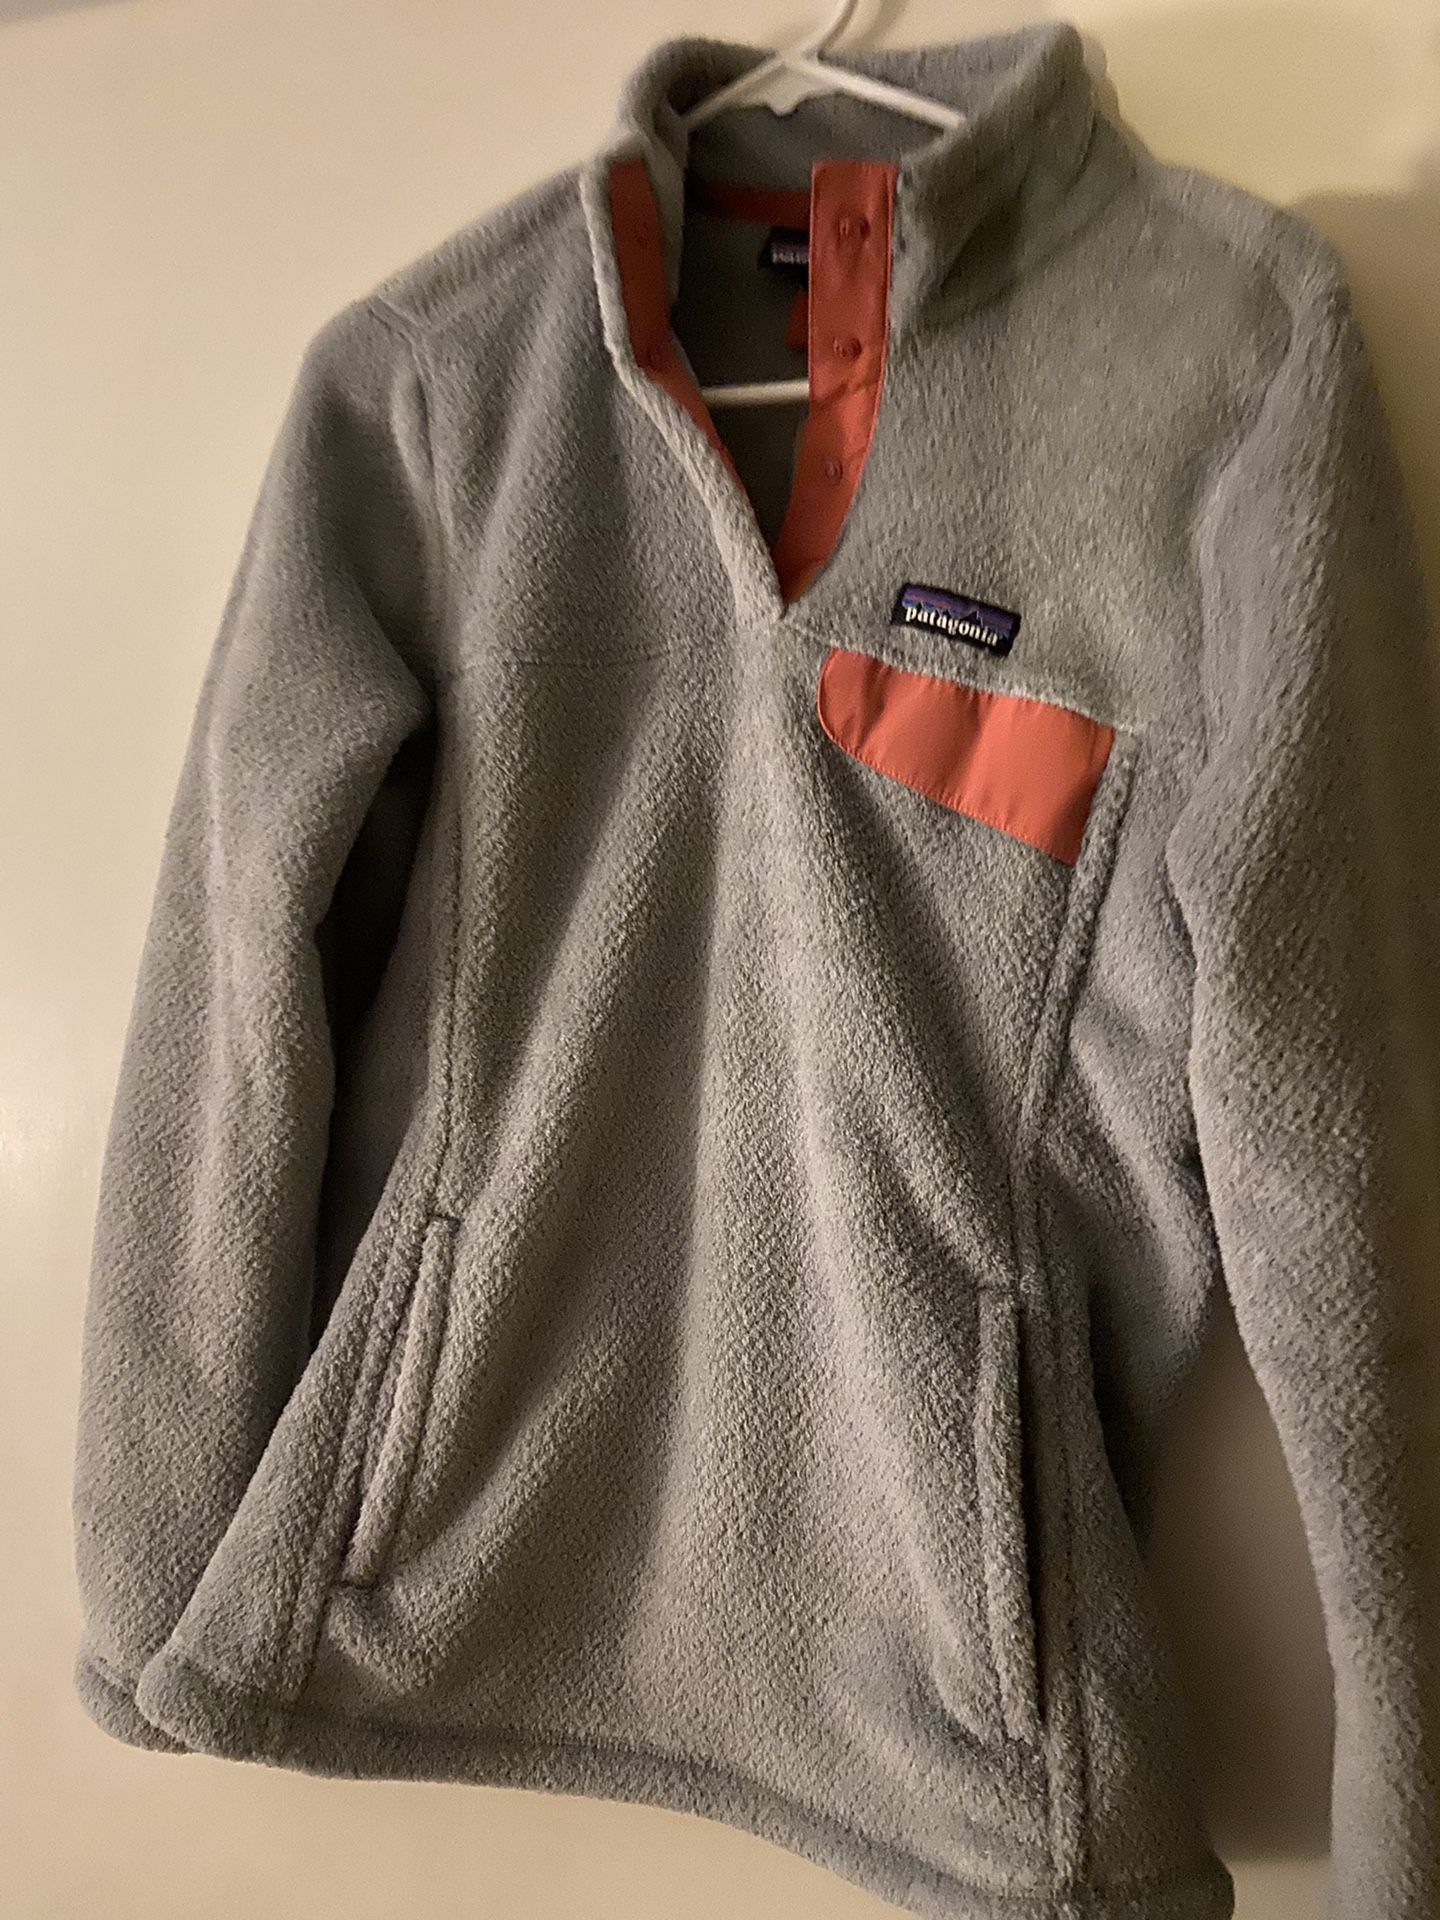 Patagonia pull over